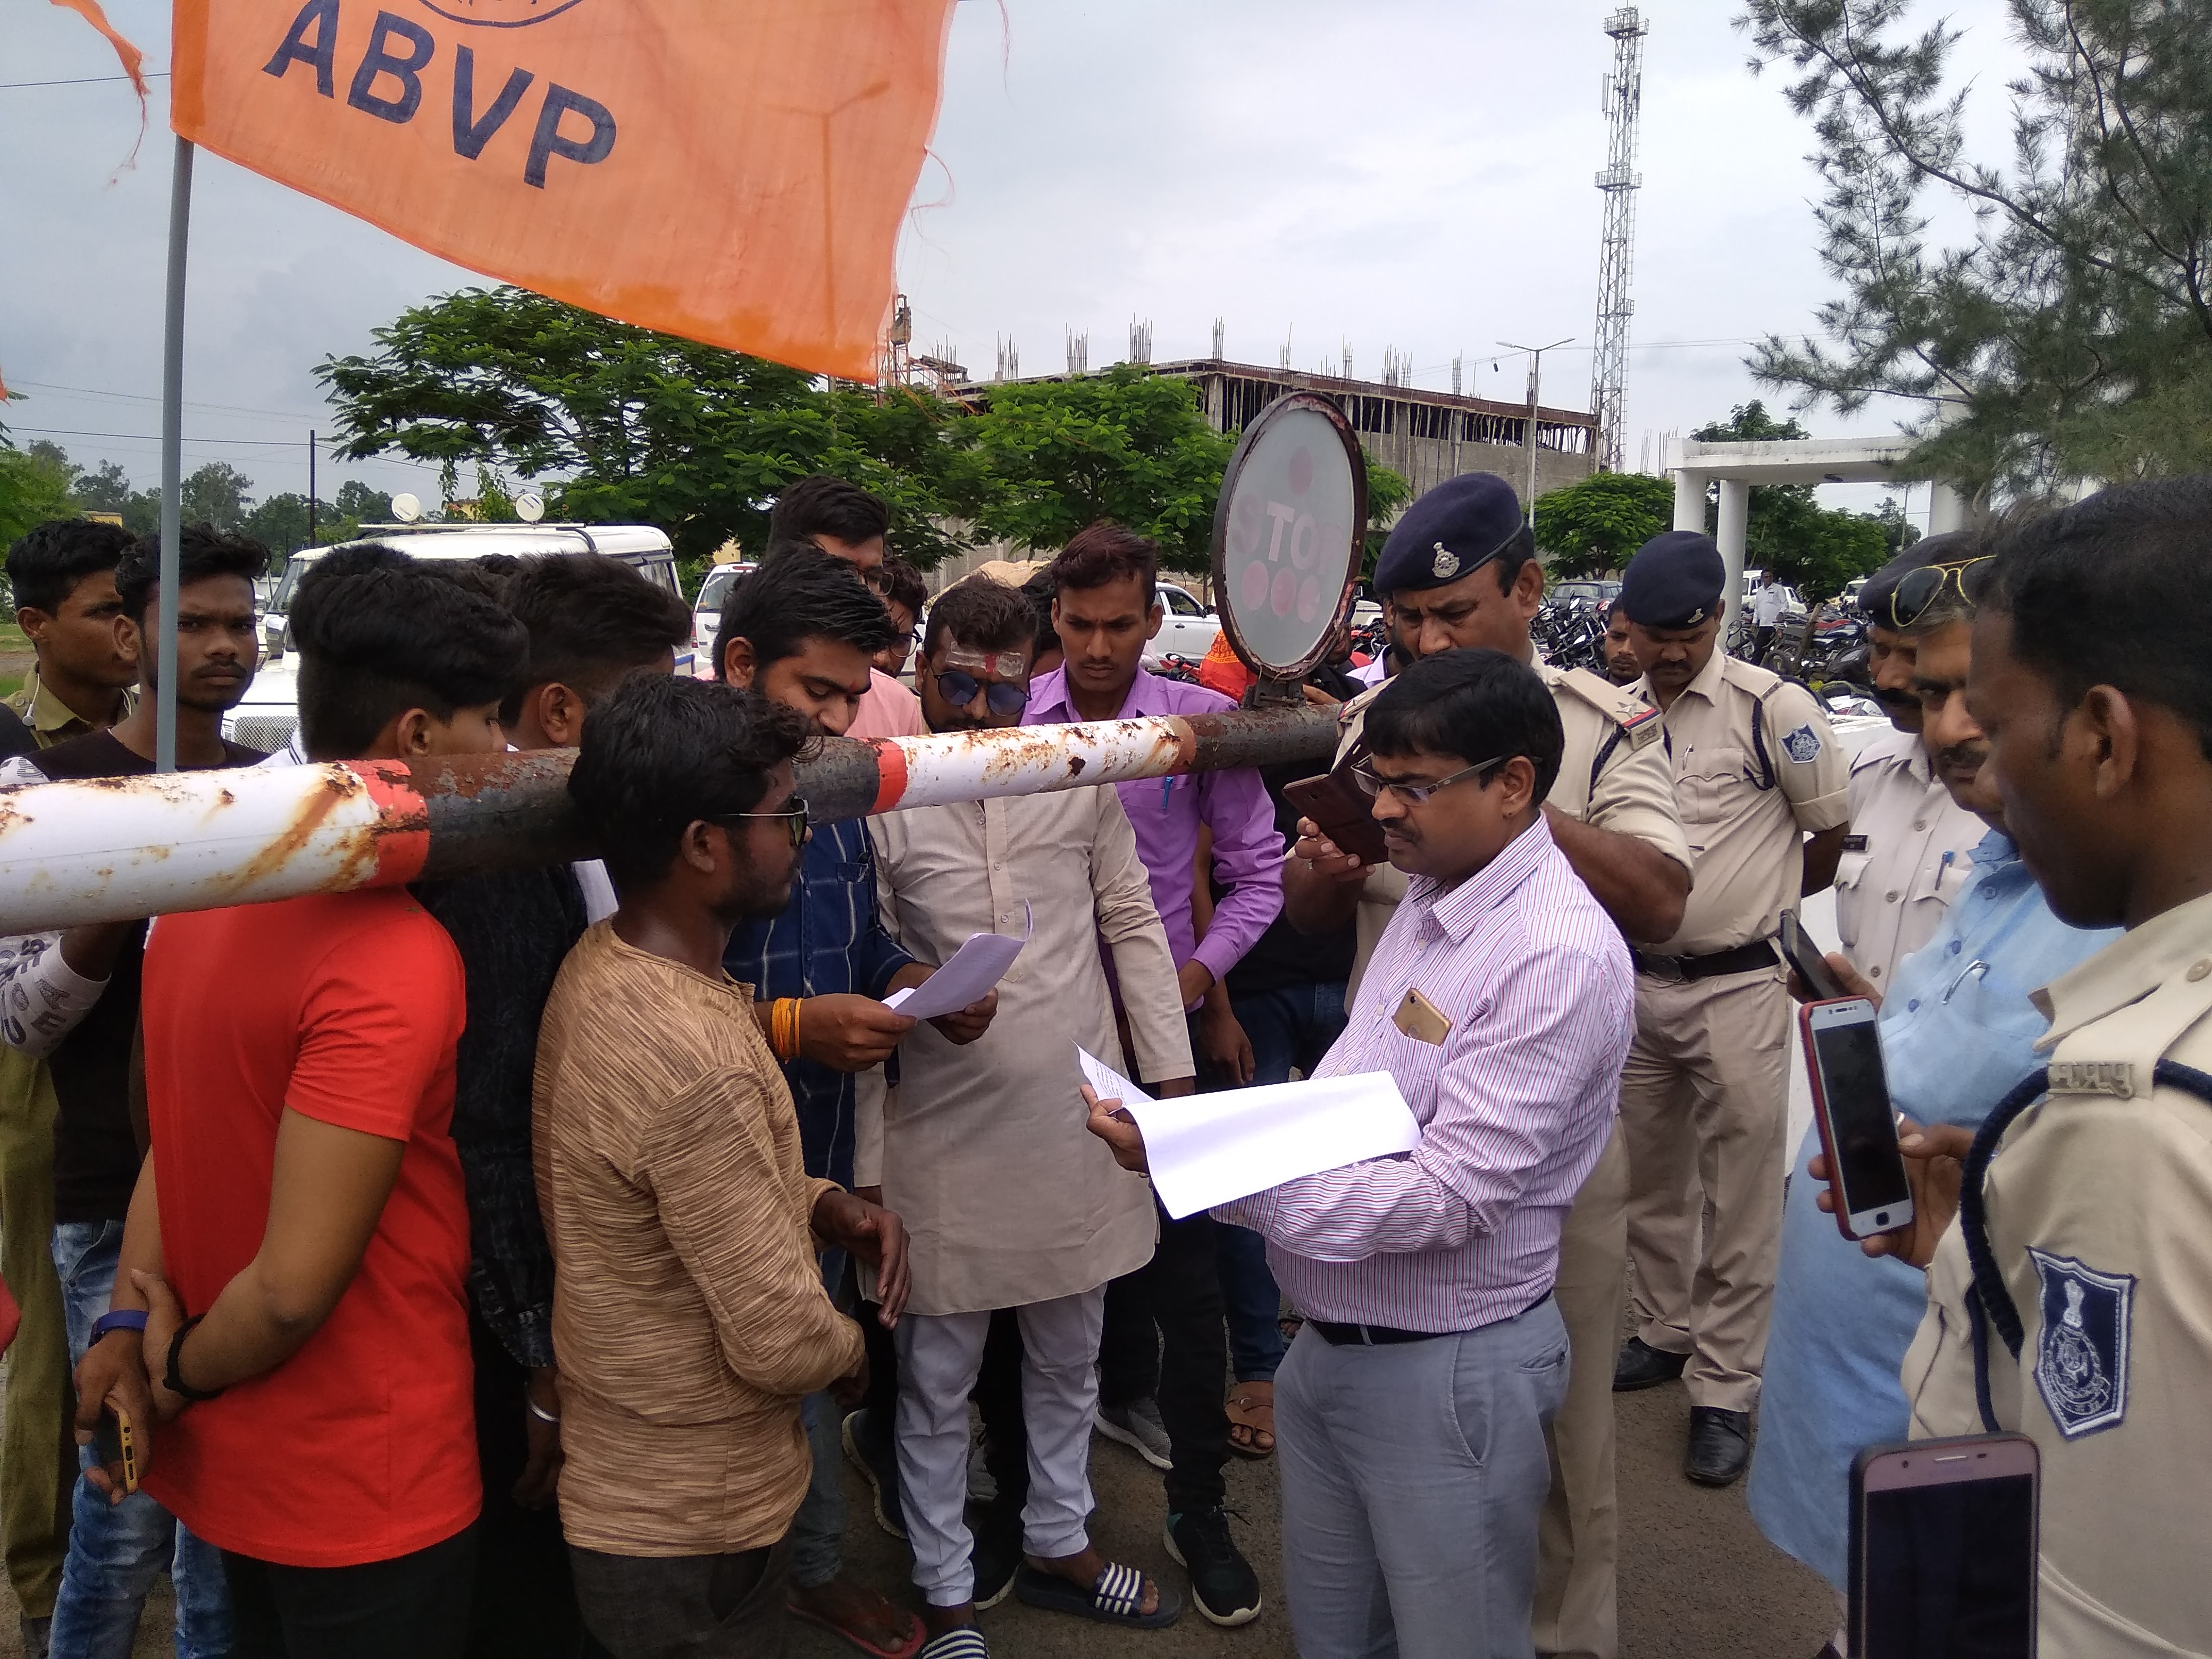 ABVP workers protested against Jabalpur incident